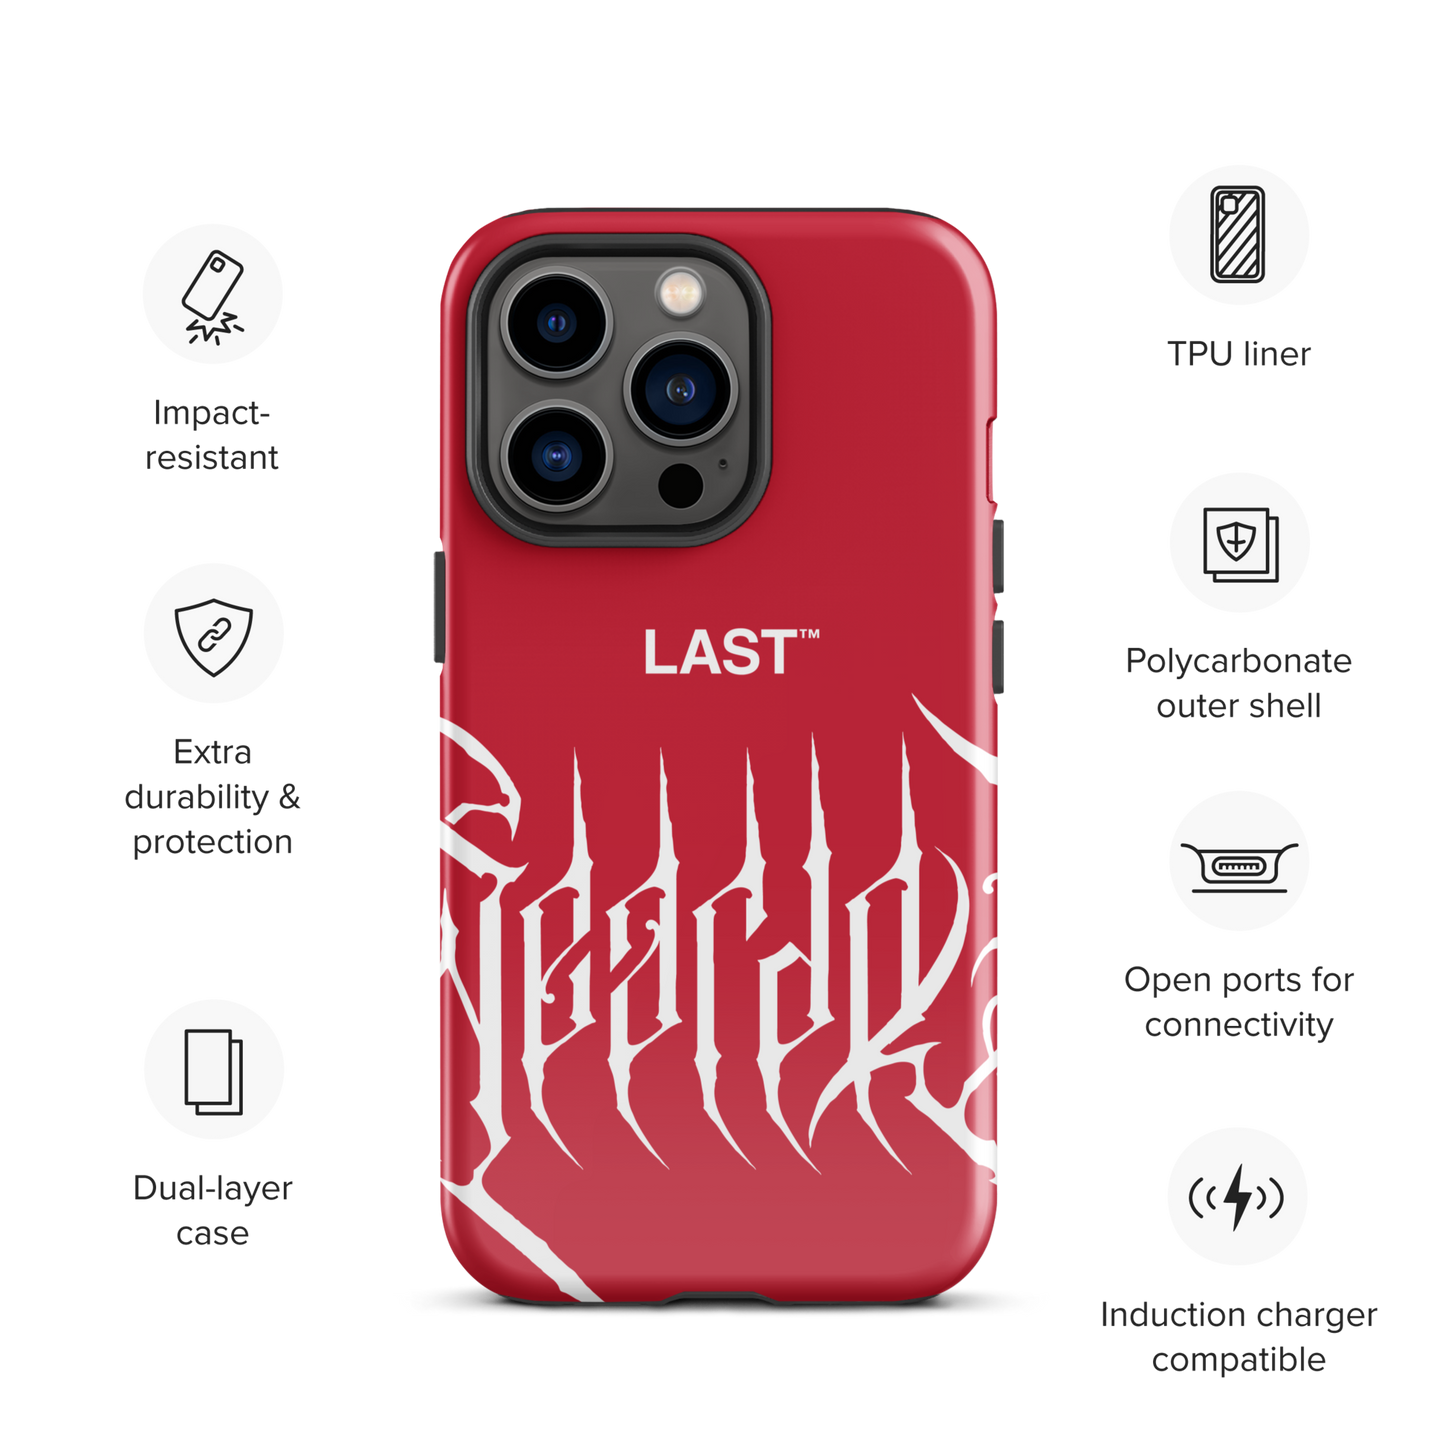 WEARDOZ x LAST "Red" Tough Case for iPhone®